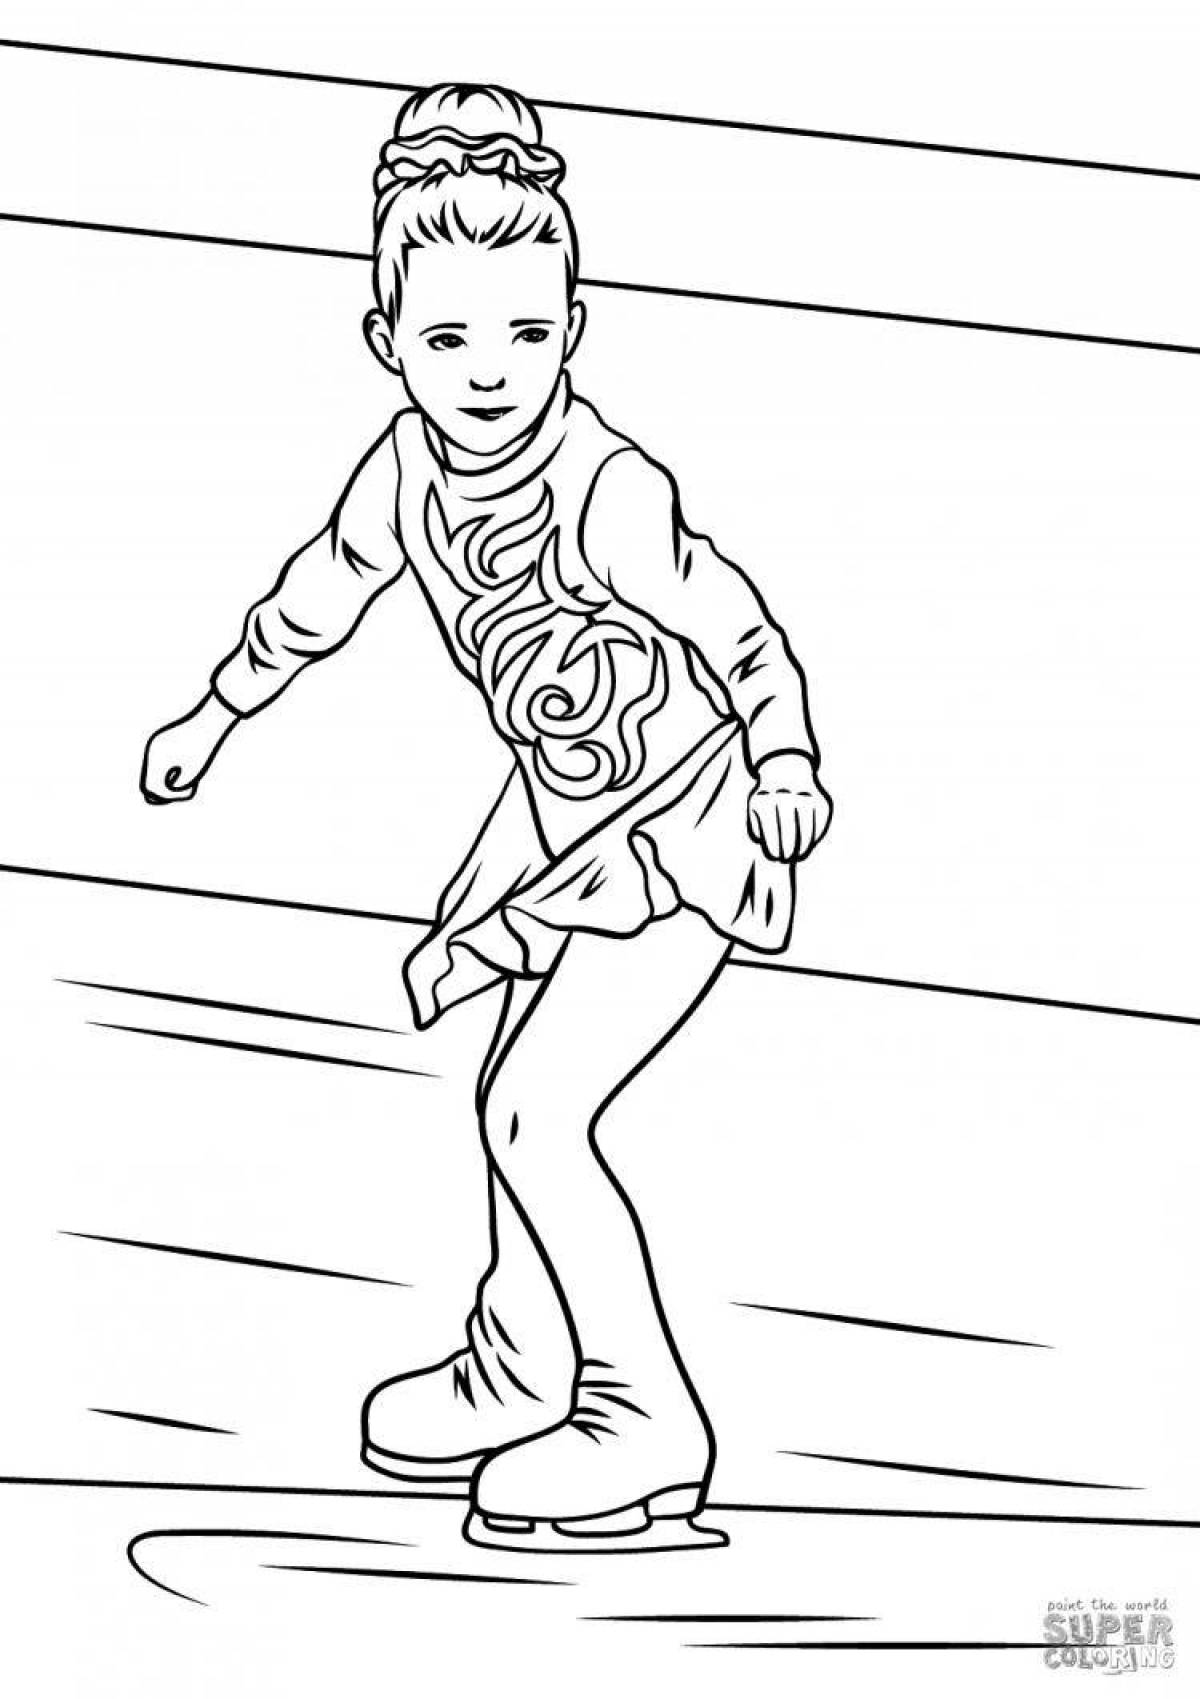 Outstanding figure skater coloring page for kids